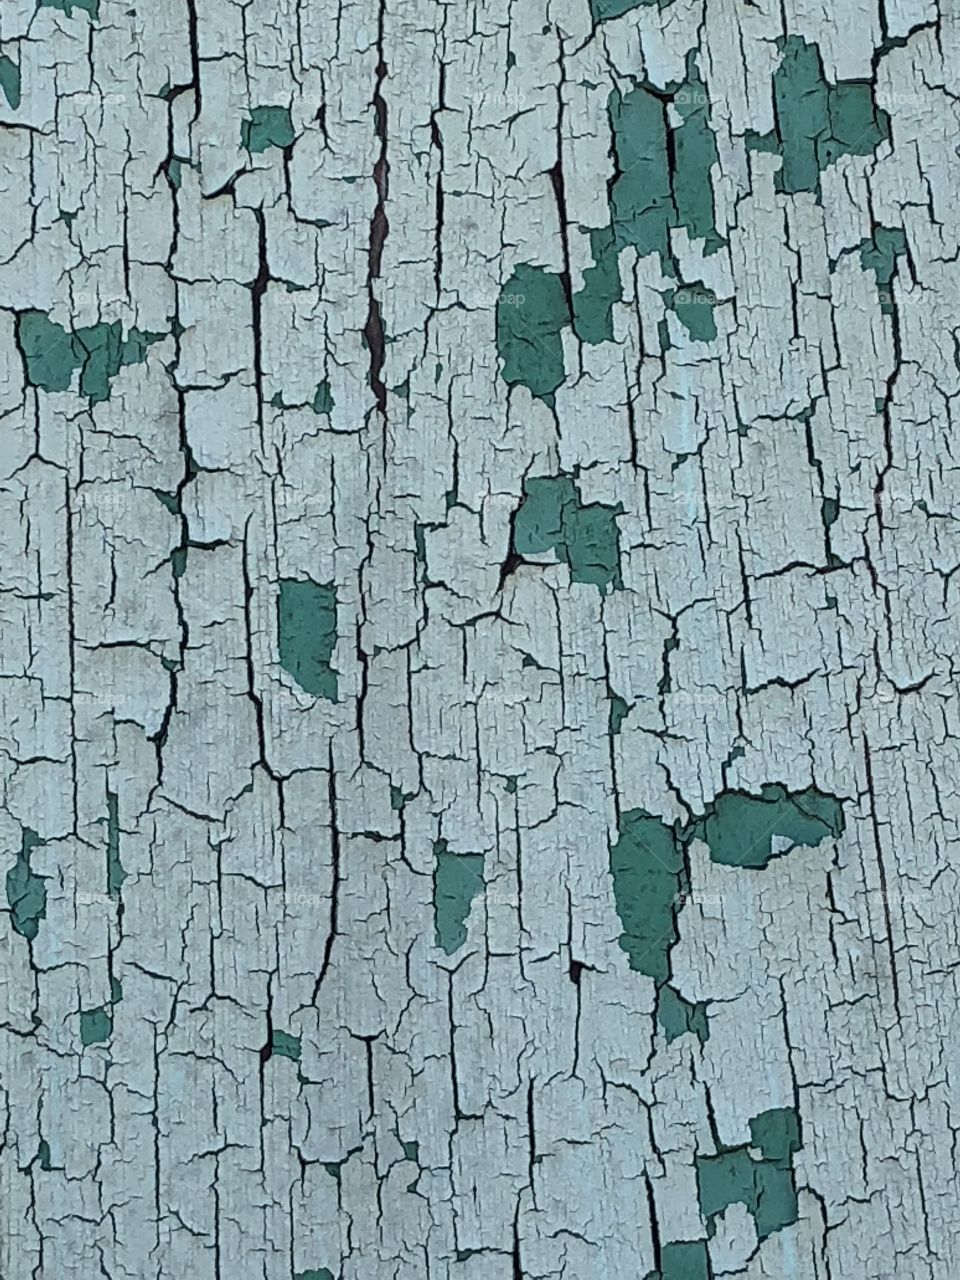 Aged cracked paint on wood door 